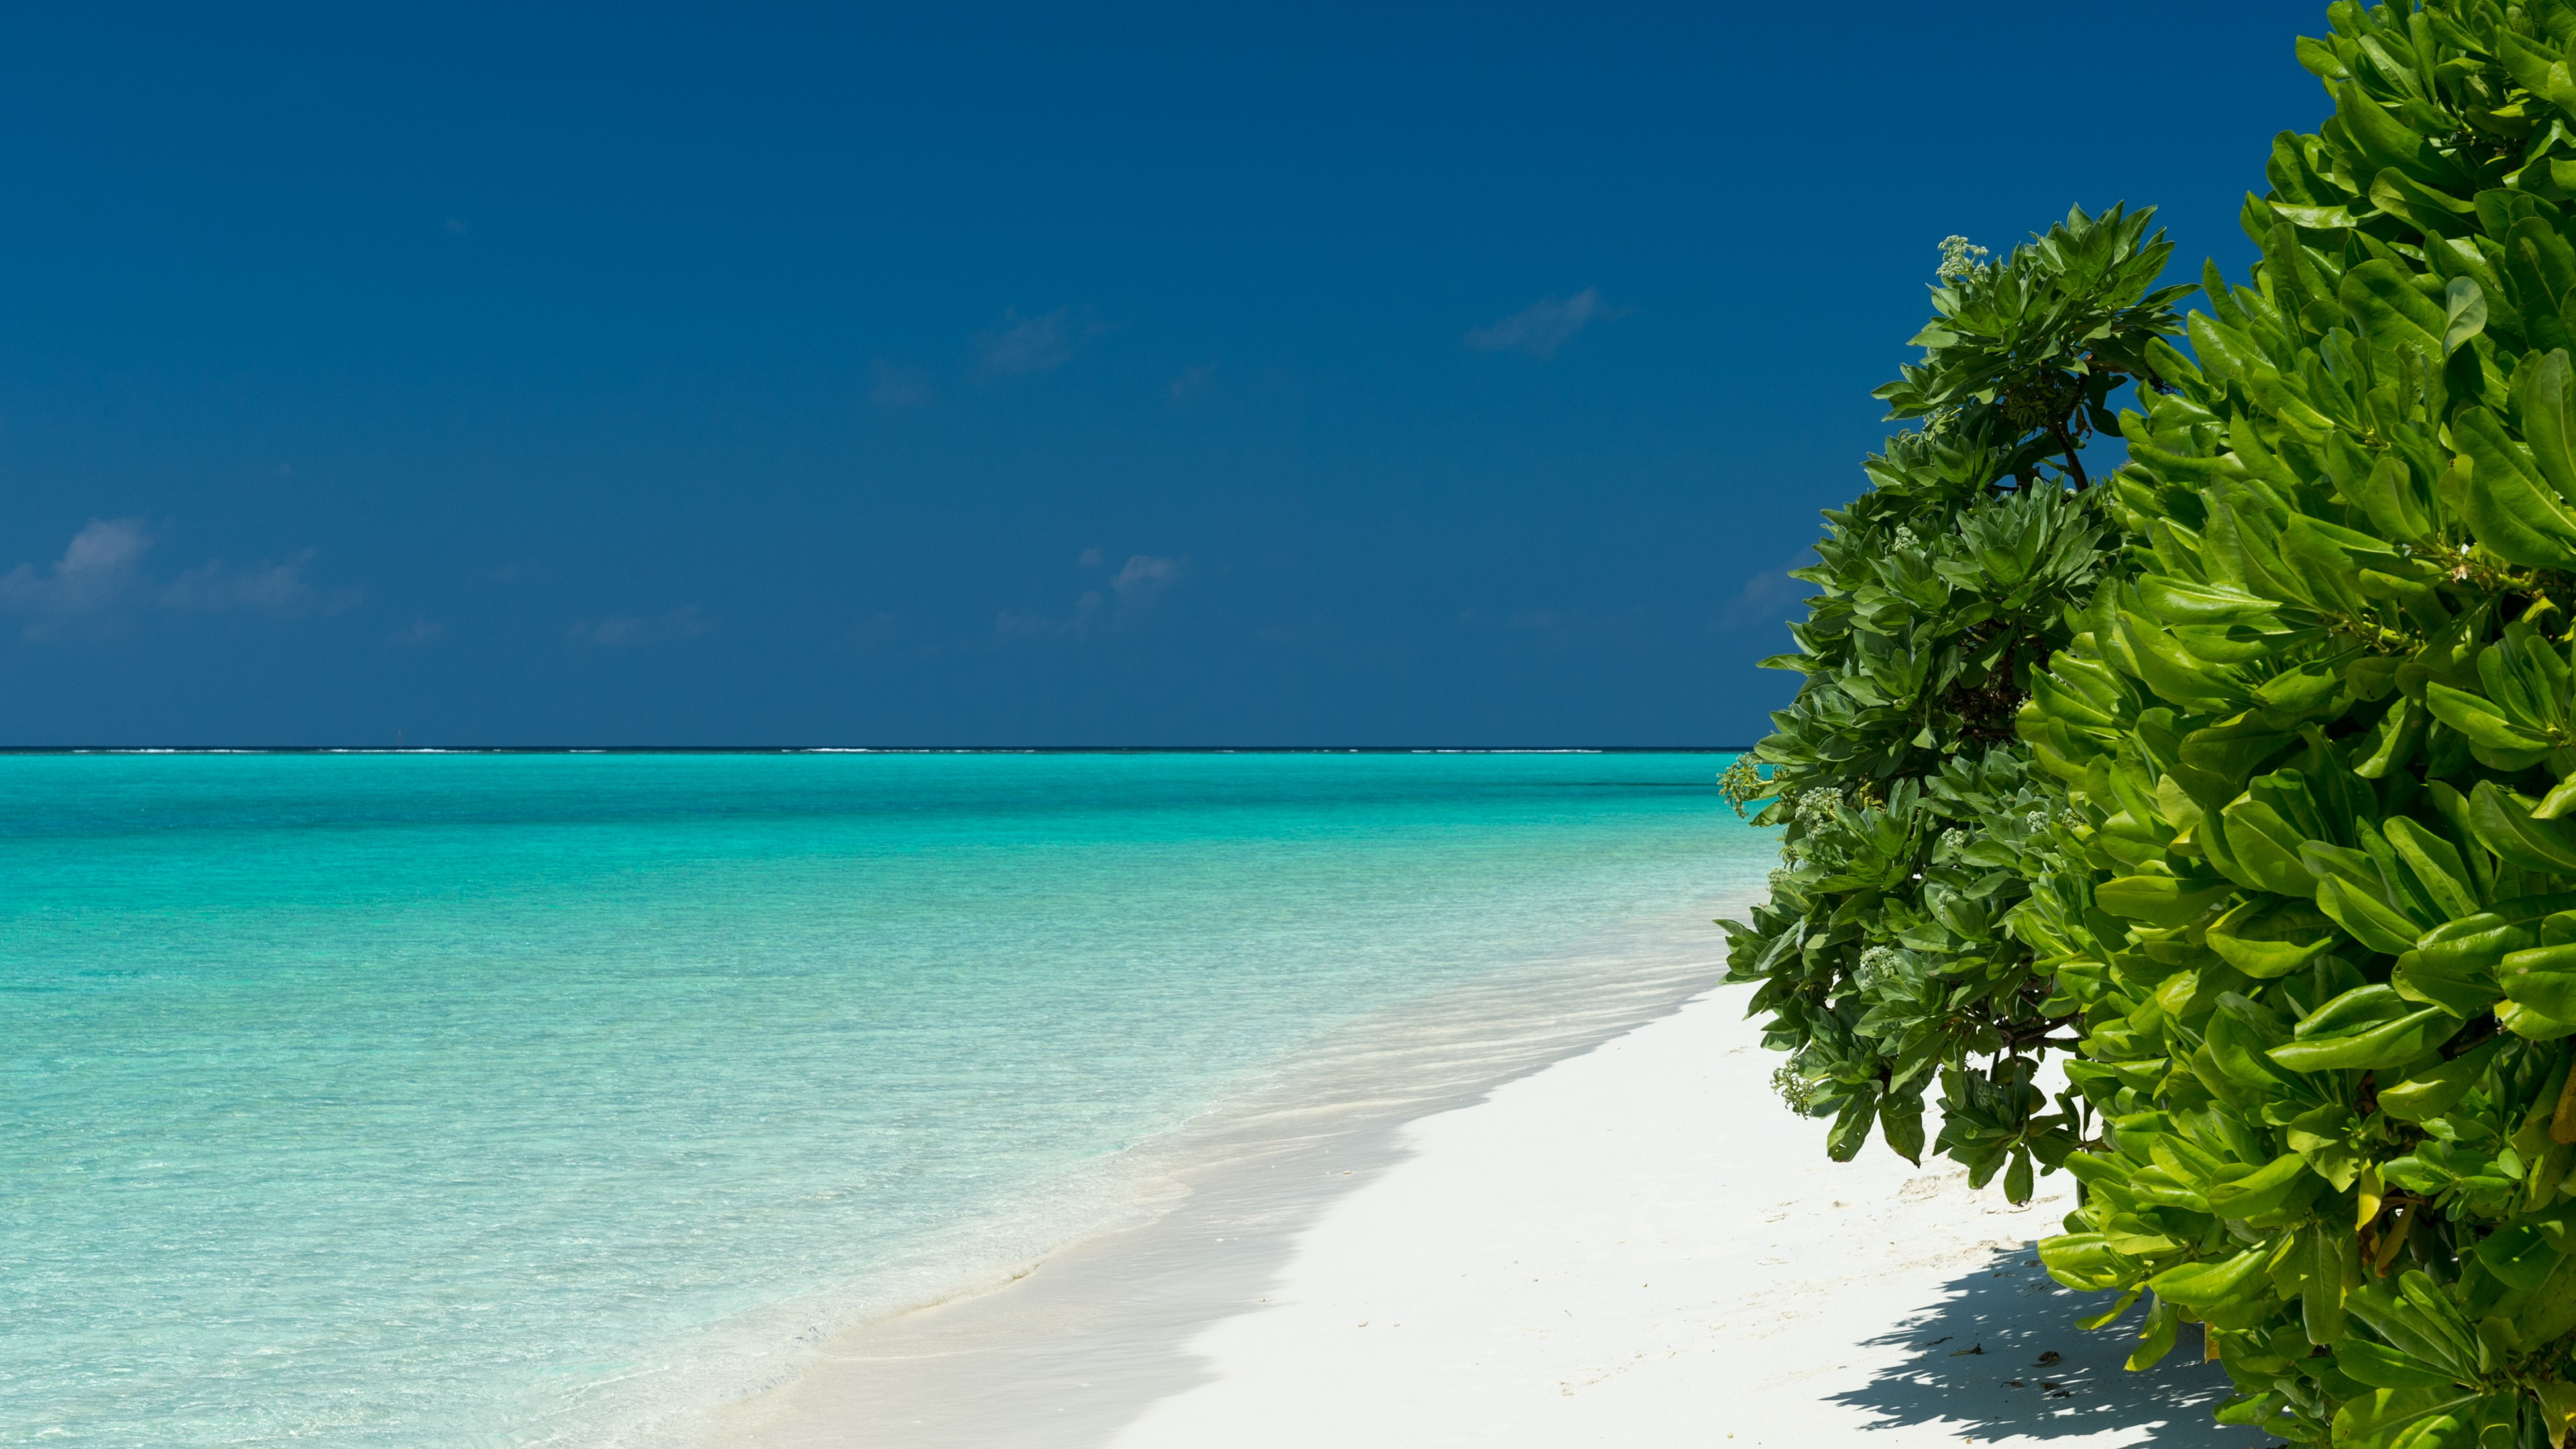 Turquoise waters of Maldives wallpaper 3840x2160